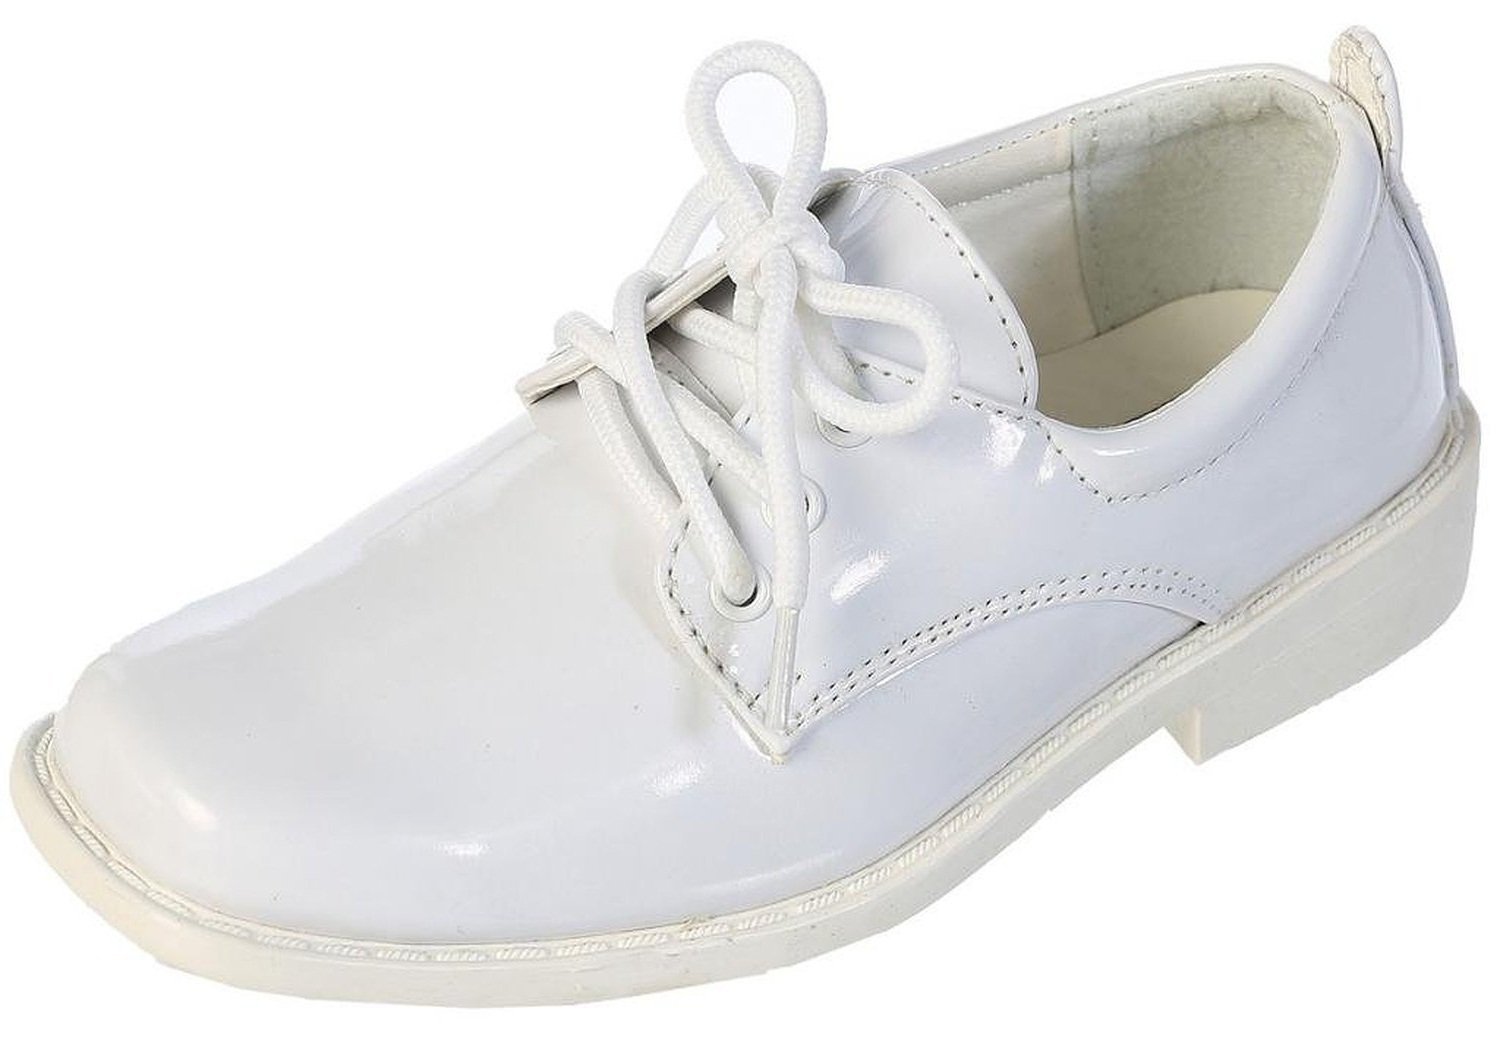 Boys Square Toe Lace Up Oxford Patent Dress Shoes - Available in White 4 Big Kid